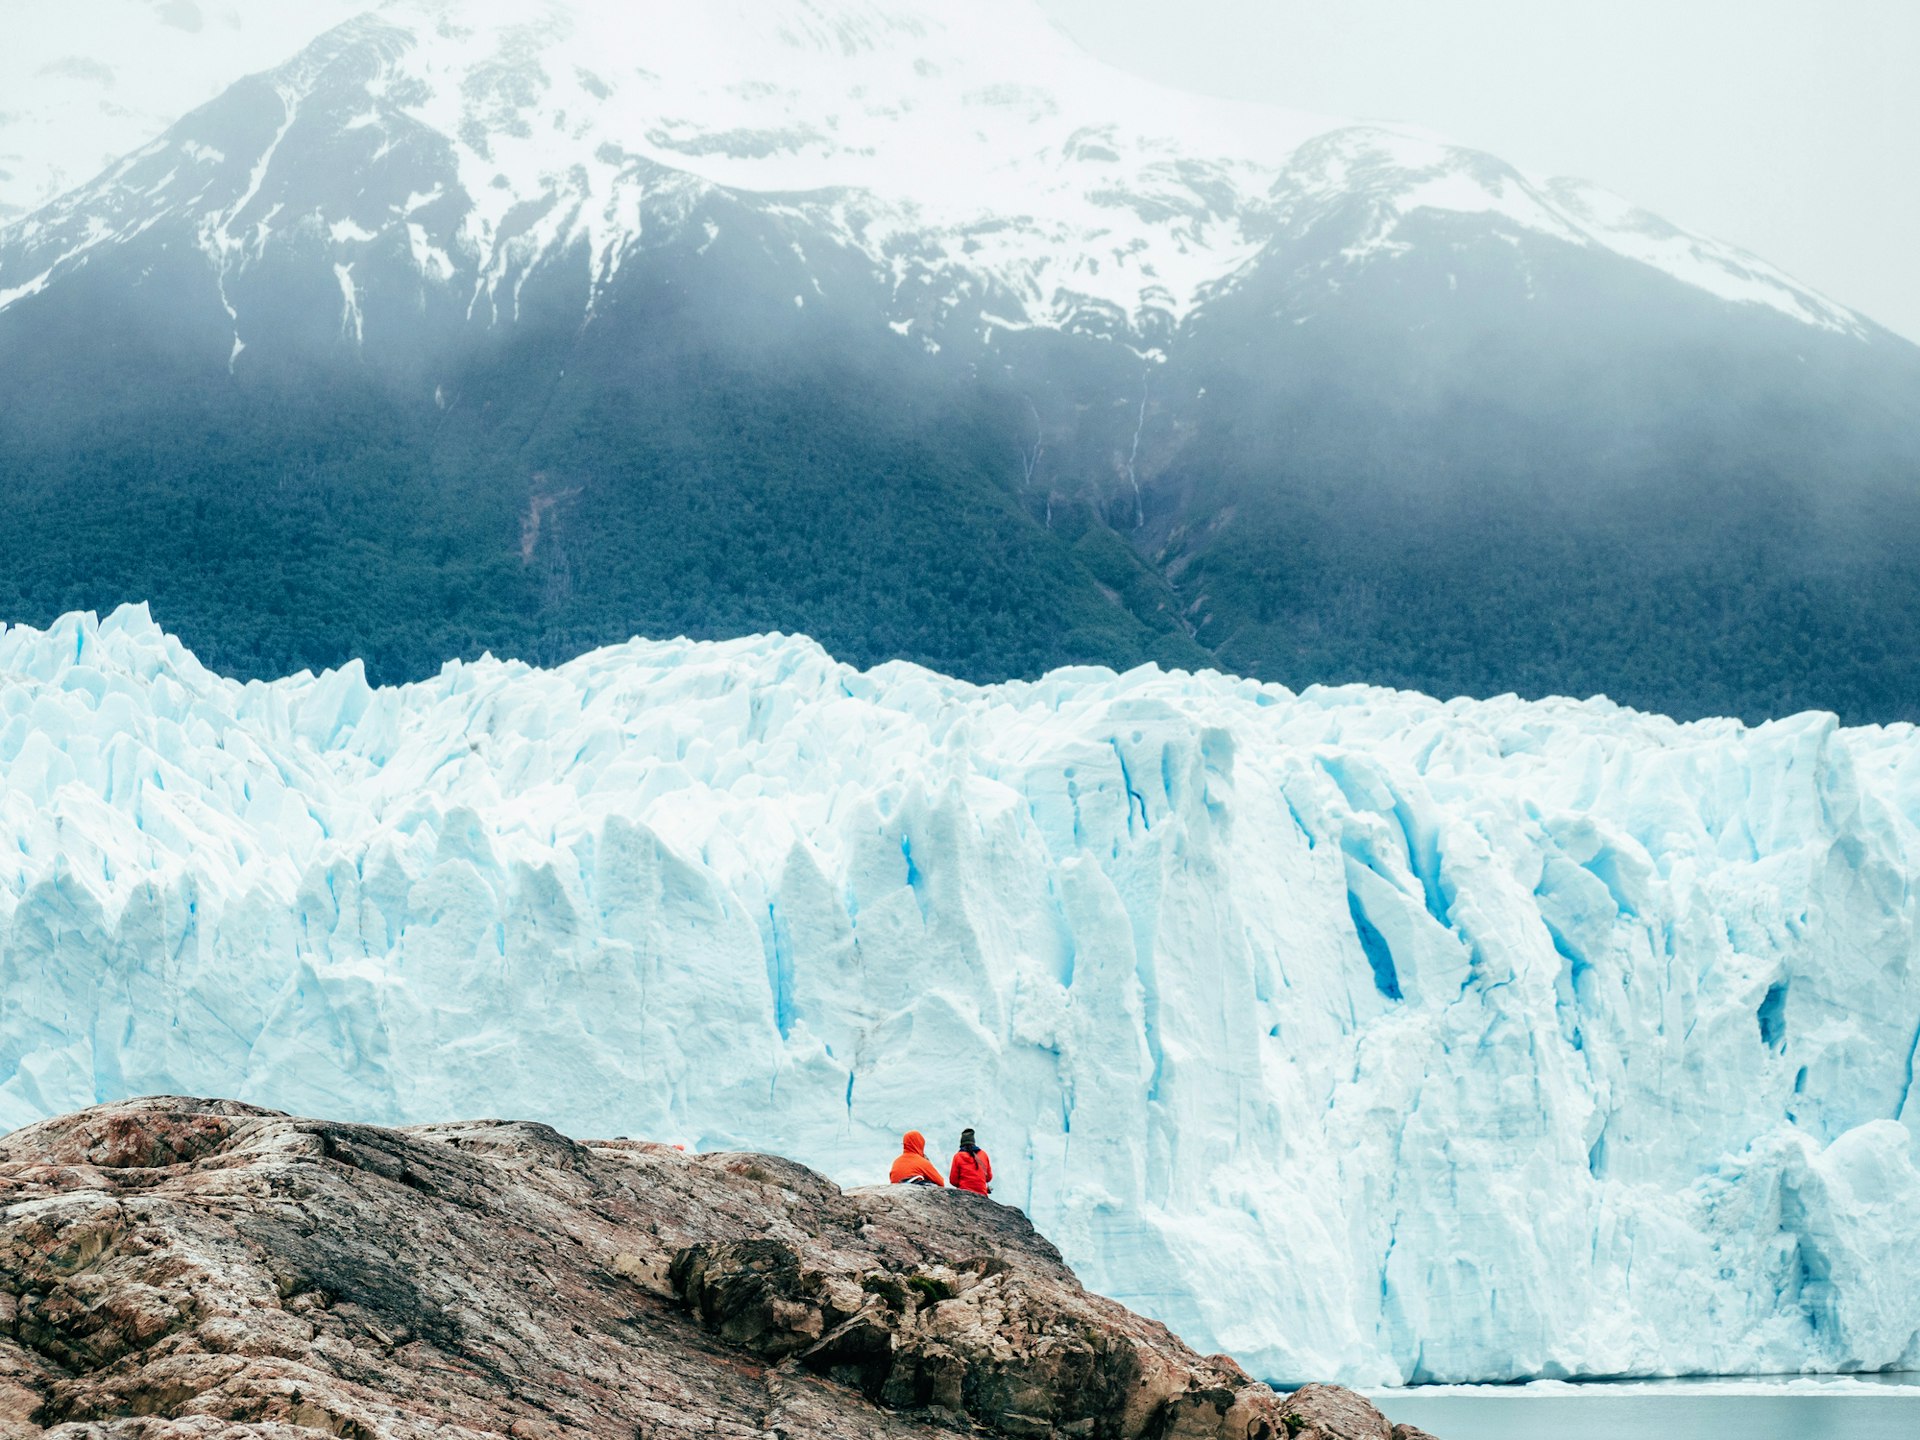 Two people sit at a viewpoint admiring a majestic blue-white wall of ice rising in front of them